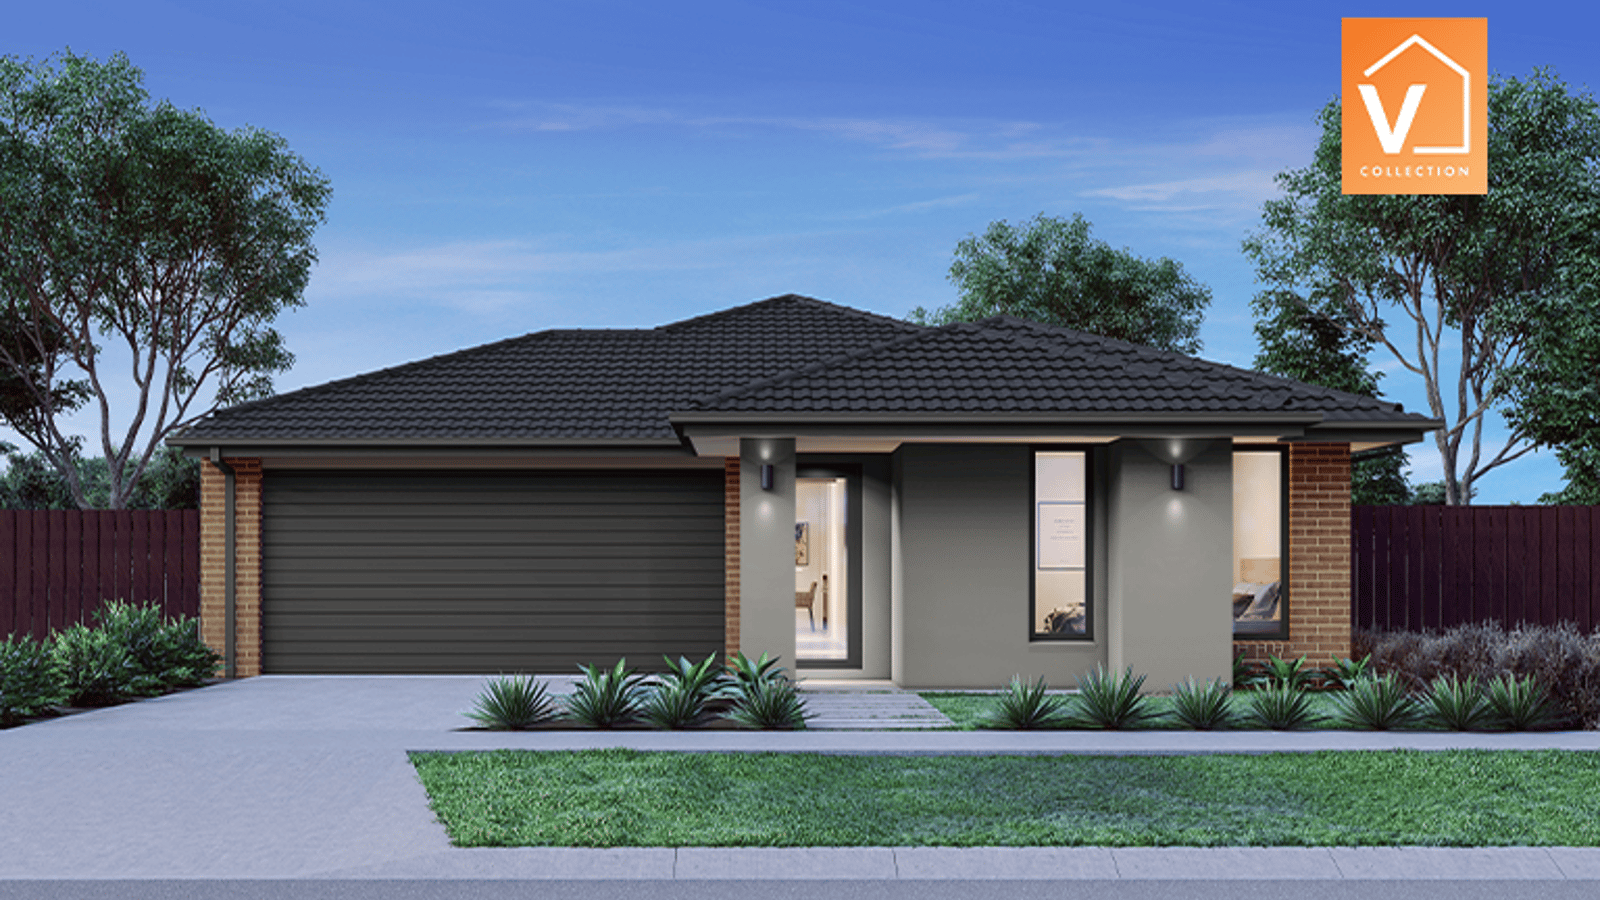 Photo of Lot 327 #8 Damiana Ave - Verve Estate, Clyde North VIC 3978 AUS